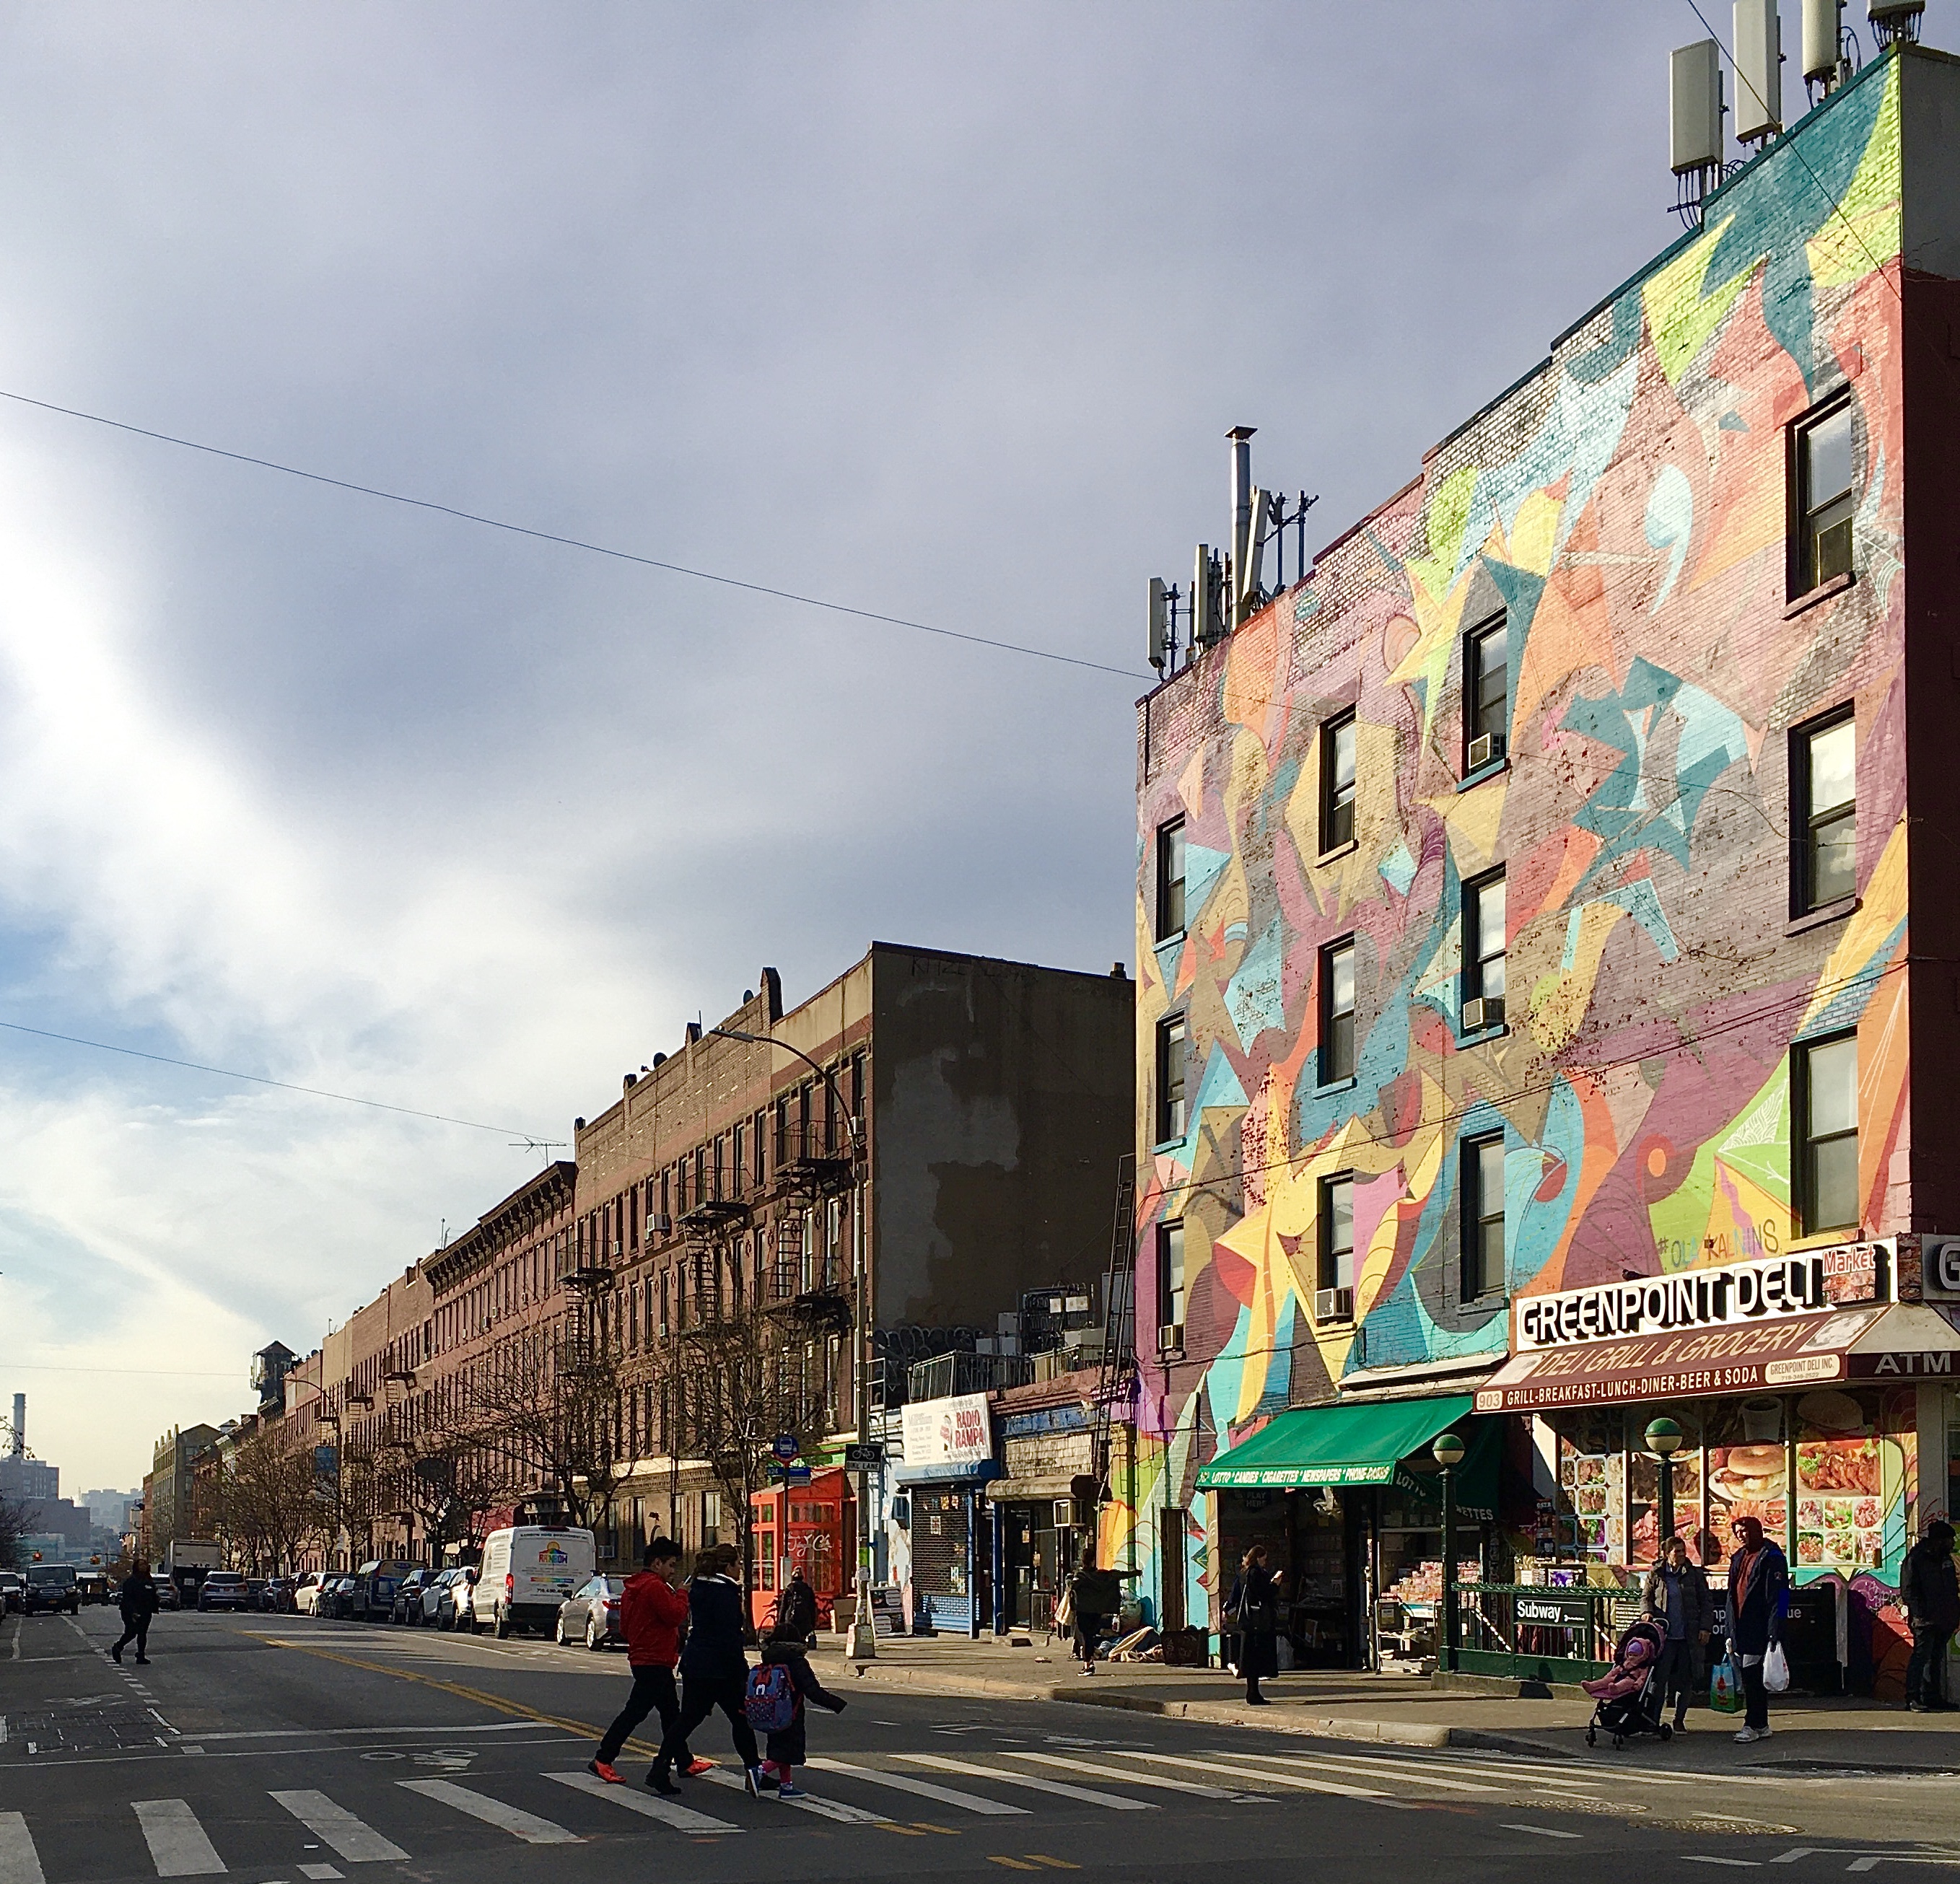  Most of this Greenpoint Avenue block is landmarked. The corner building, whose address is 903 Manhattan Ave., is not. Photo: Lore Croghan/Brooklyn Eagle